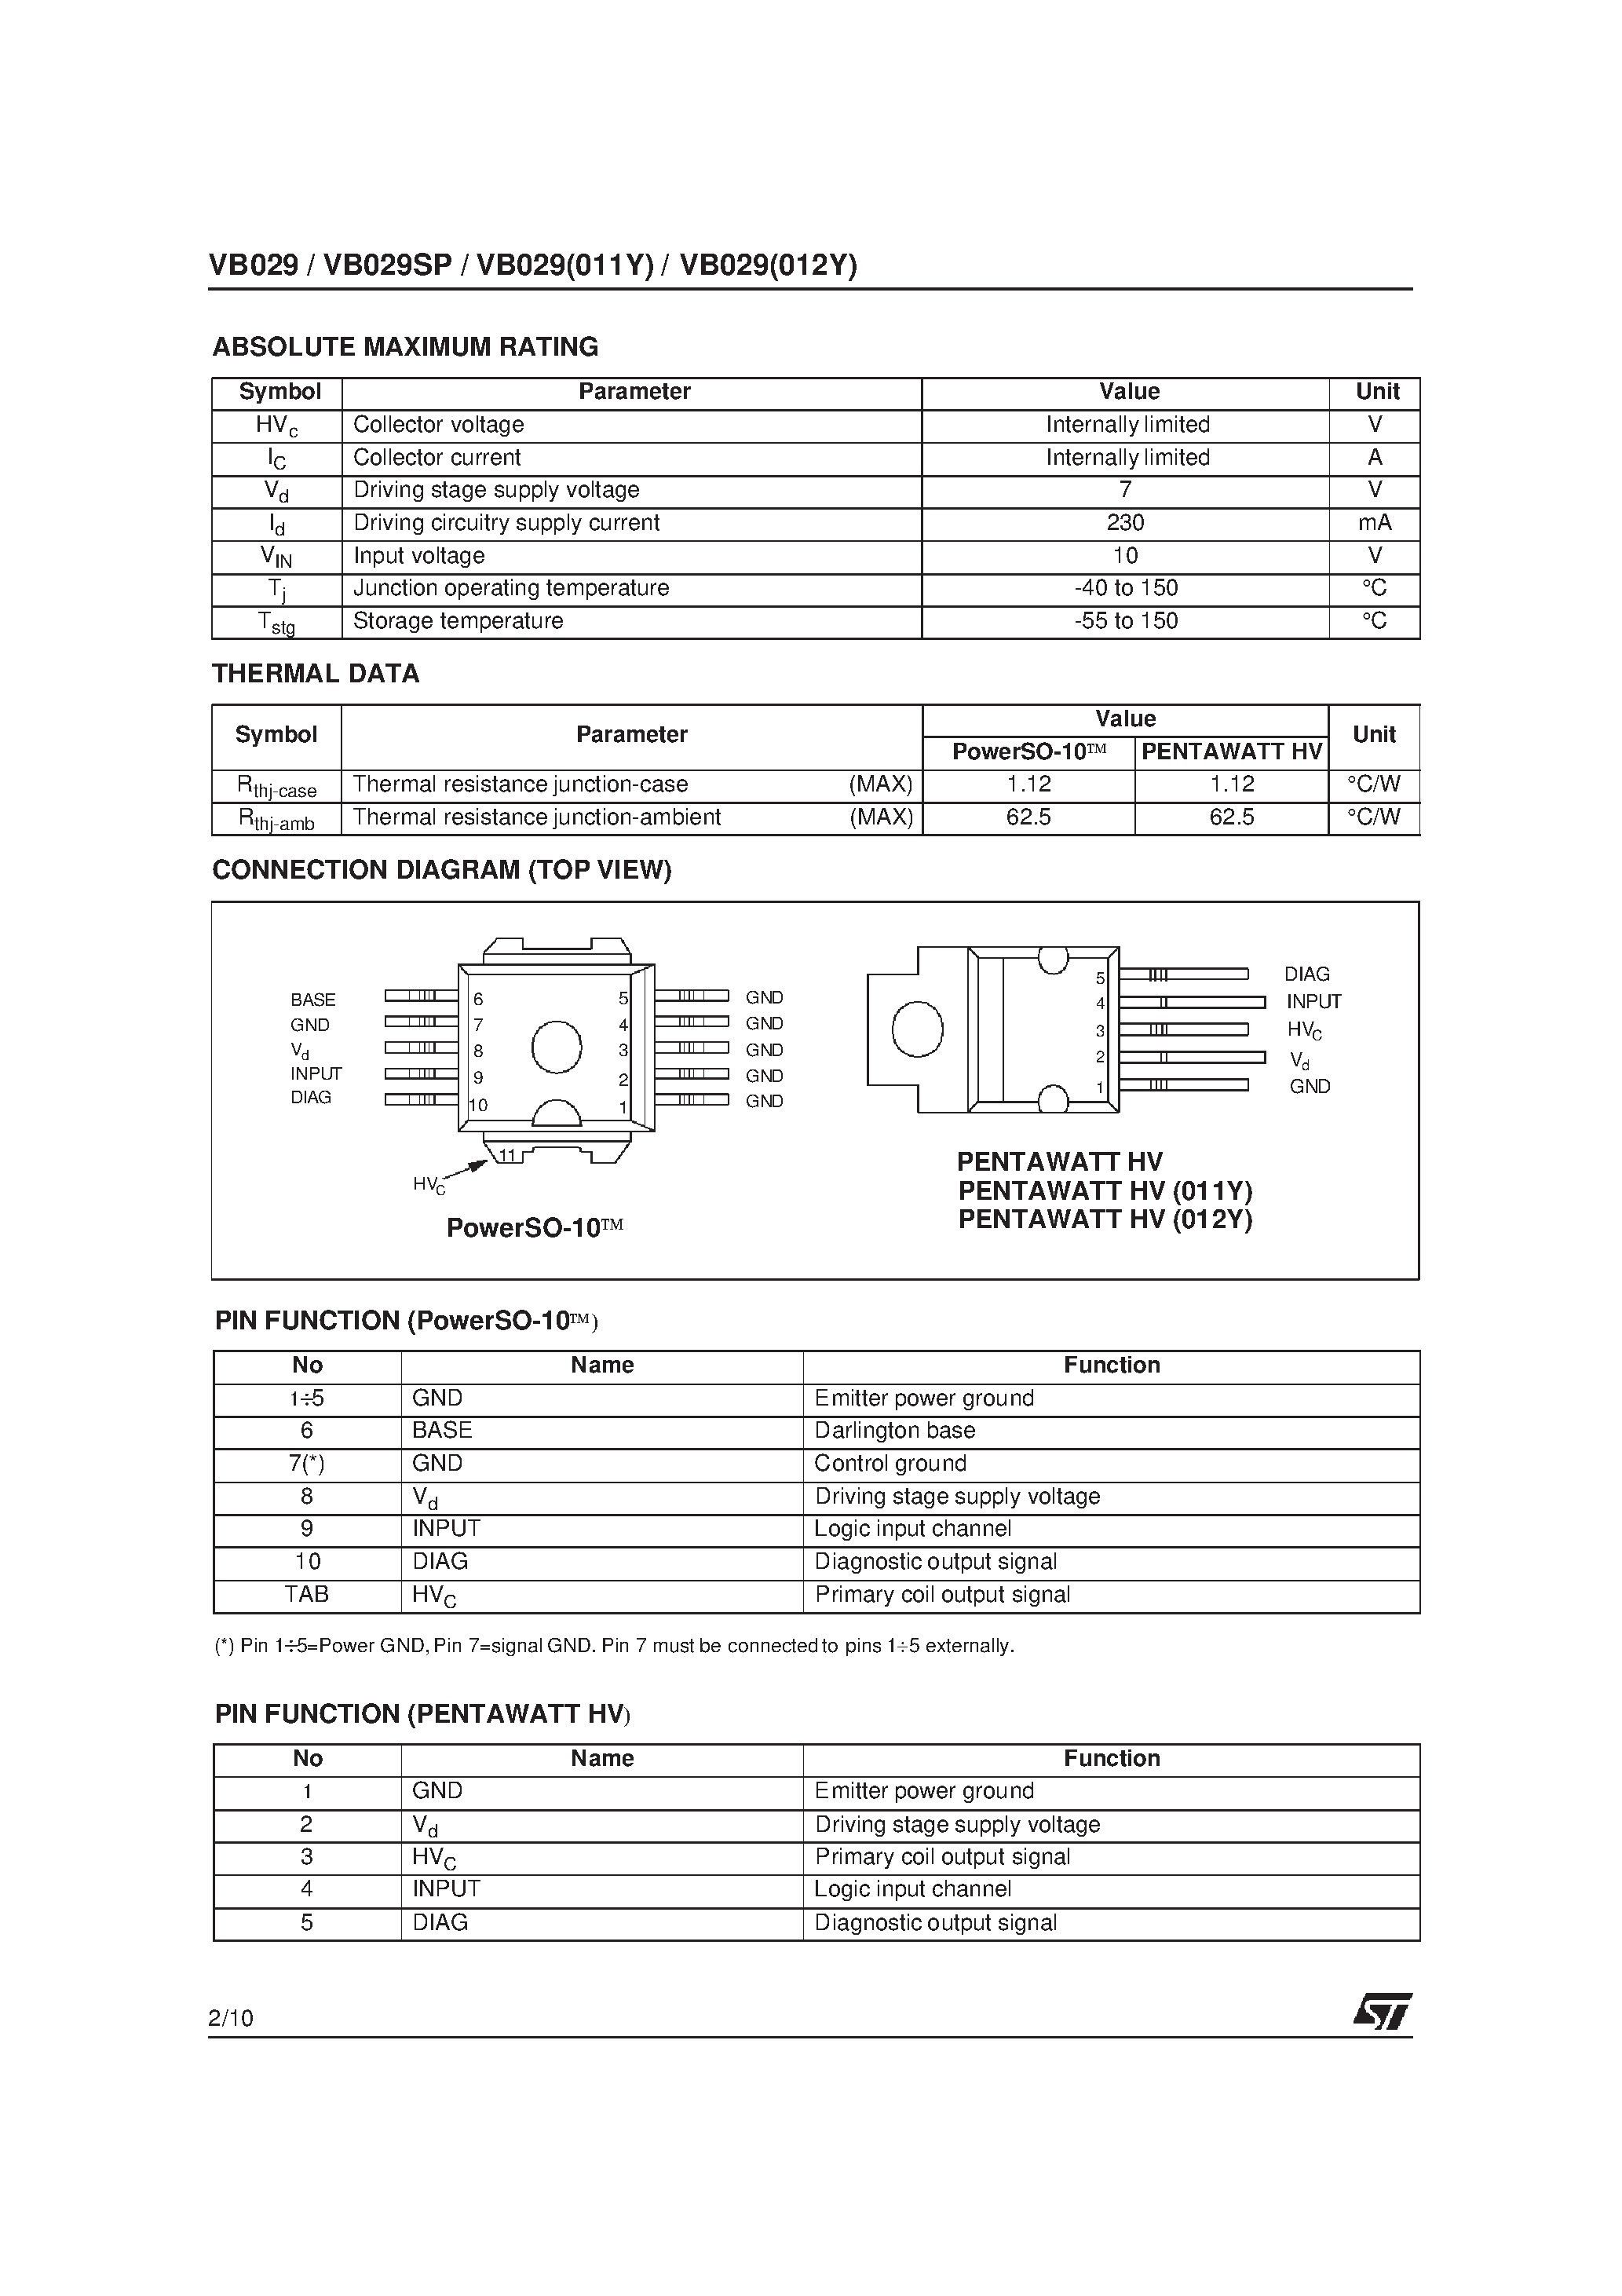 Datasheet VB029(012Y) - HIGH VOLTAGE IGNITION COIL DRIVER POWER I.C. page 2